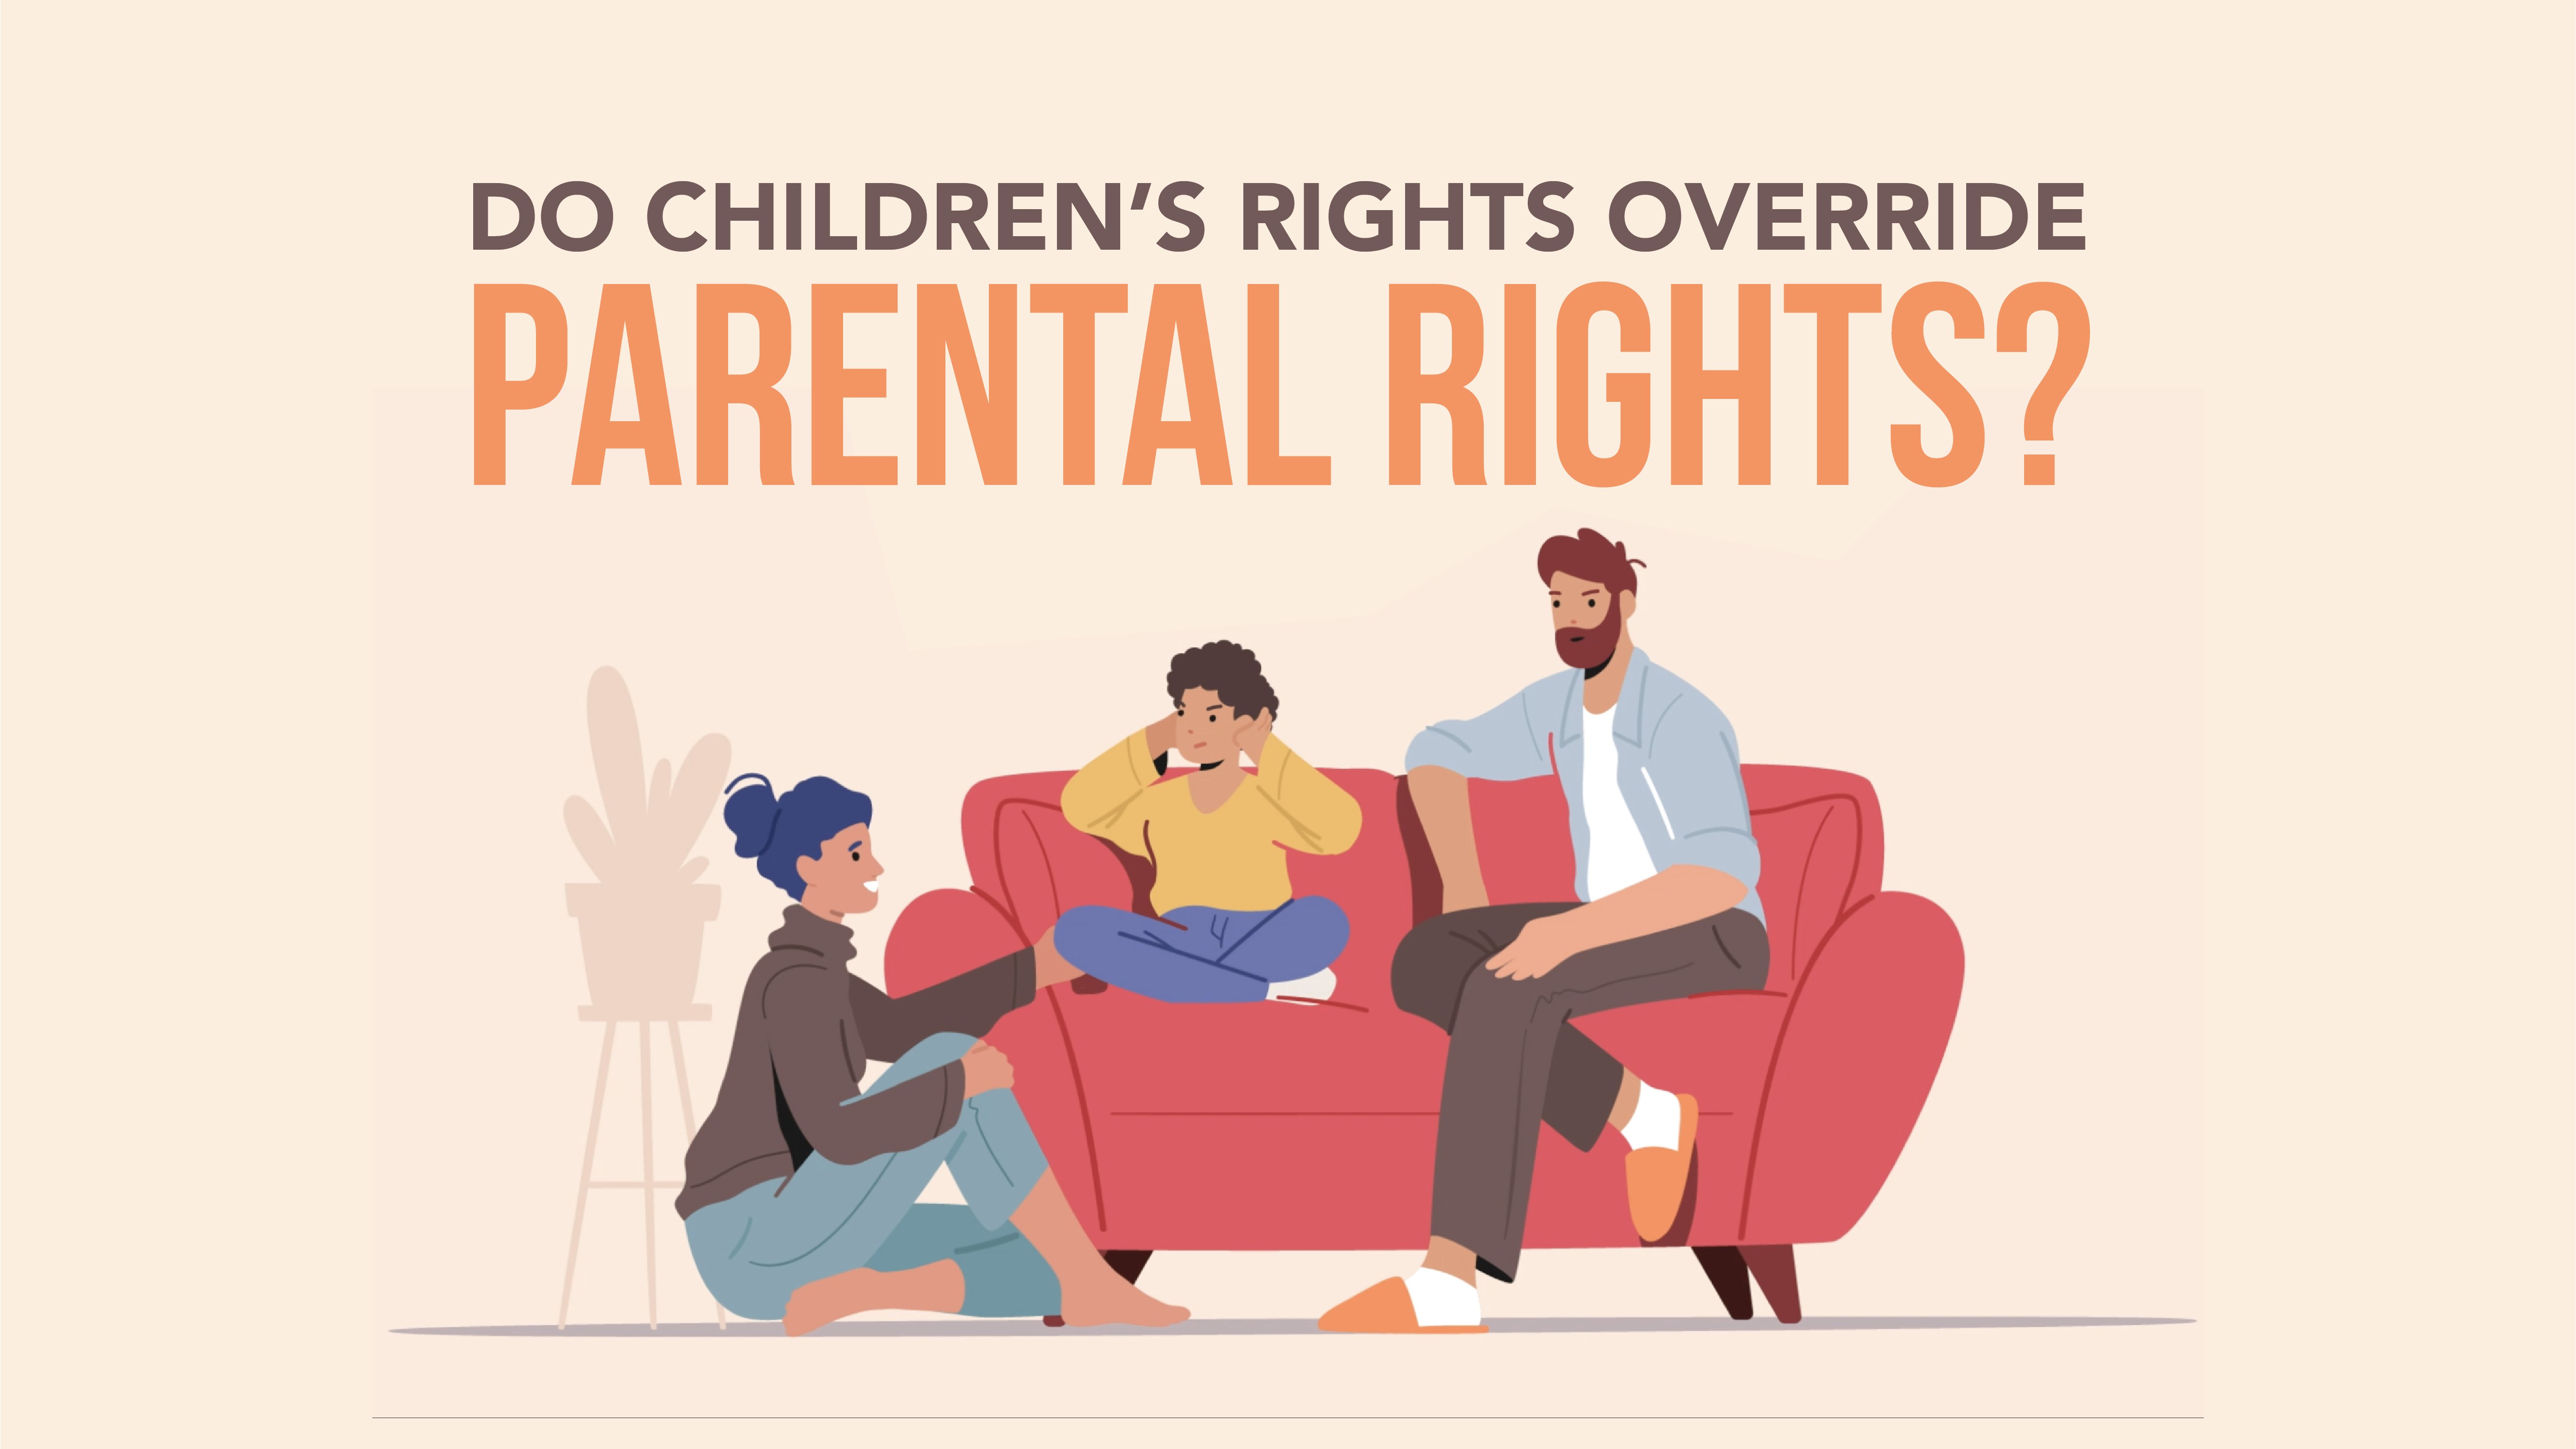 Do Children’s Rights Override Parental Rights?